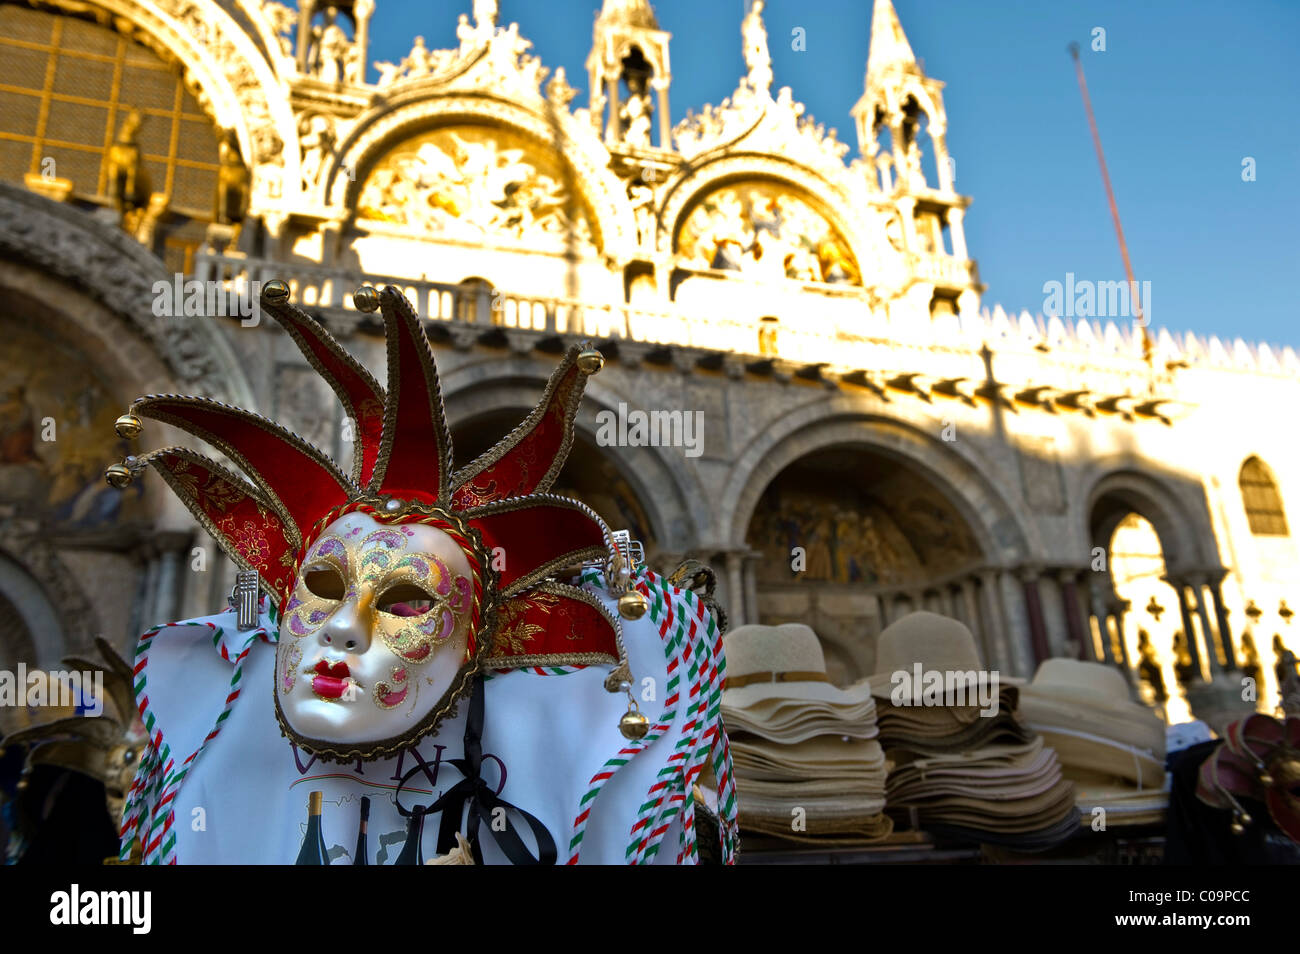 Venetian mask at a souvenir stall in St. Mark's Square in front of St. Mark's Basilica, Venice, Veneto, Italy, Europe Stock Photo